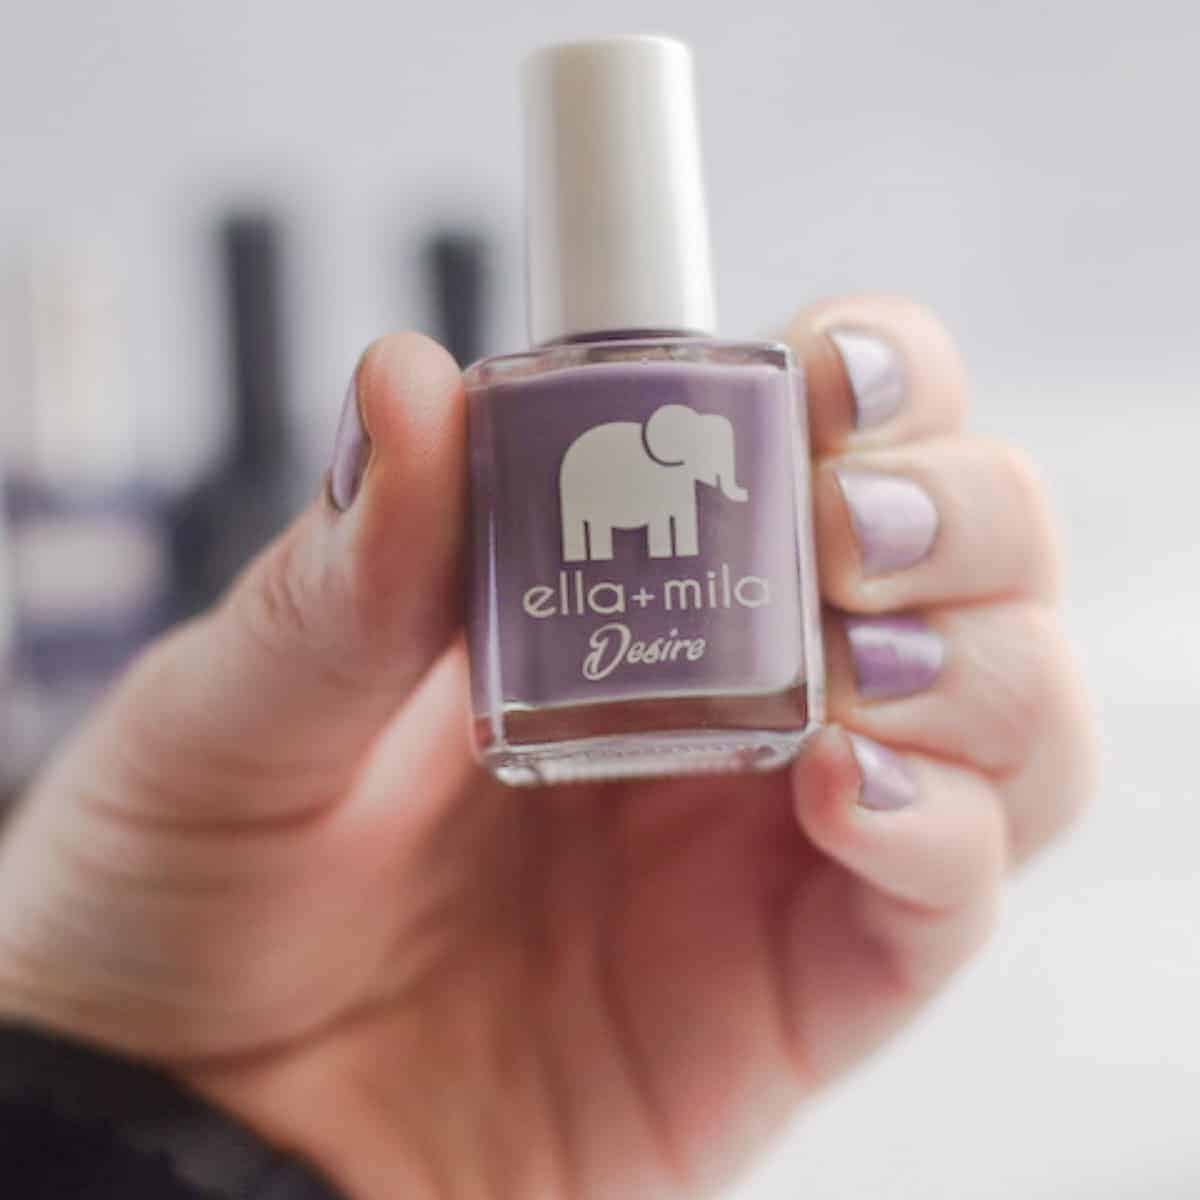 A Selection of Better Nail Polishes - Center for Environmental Health